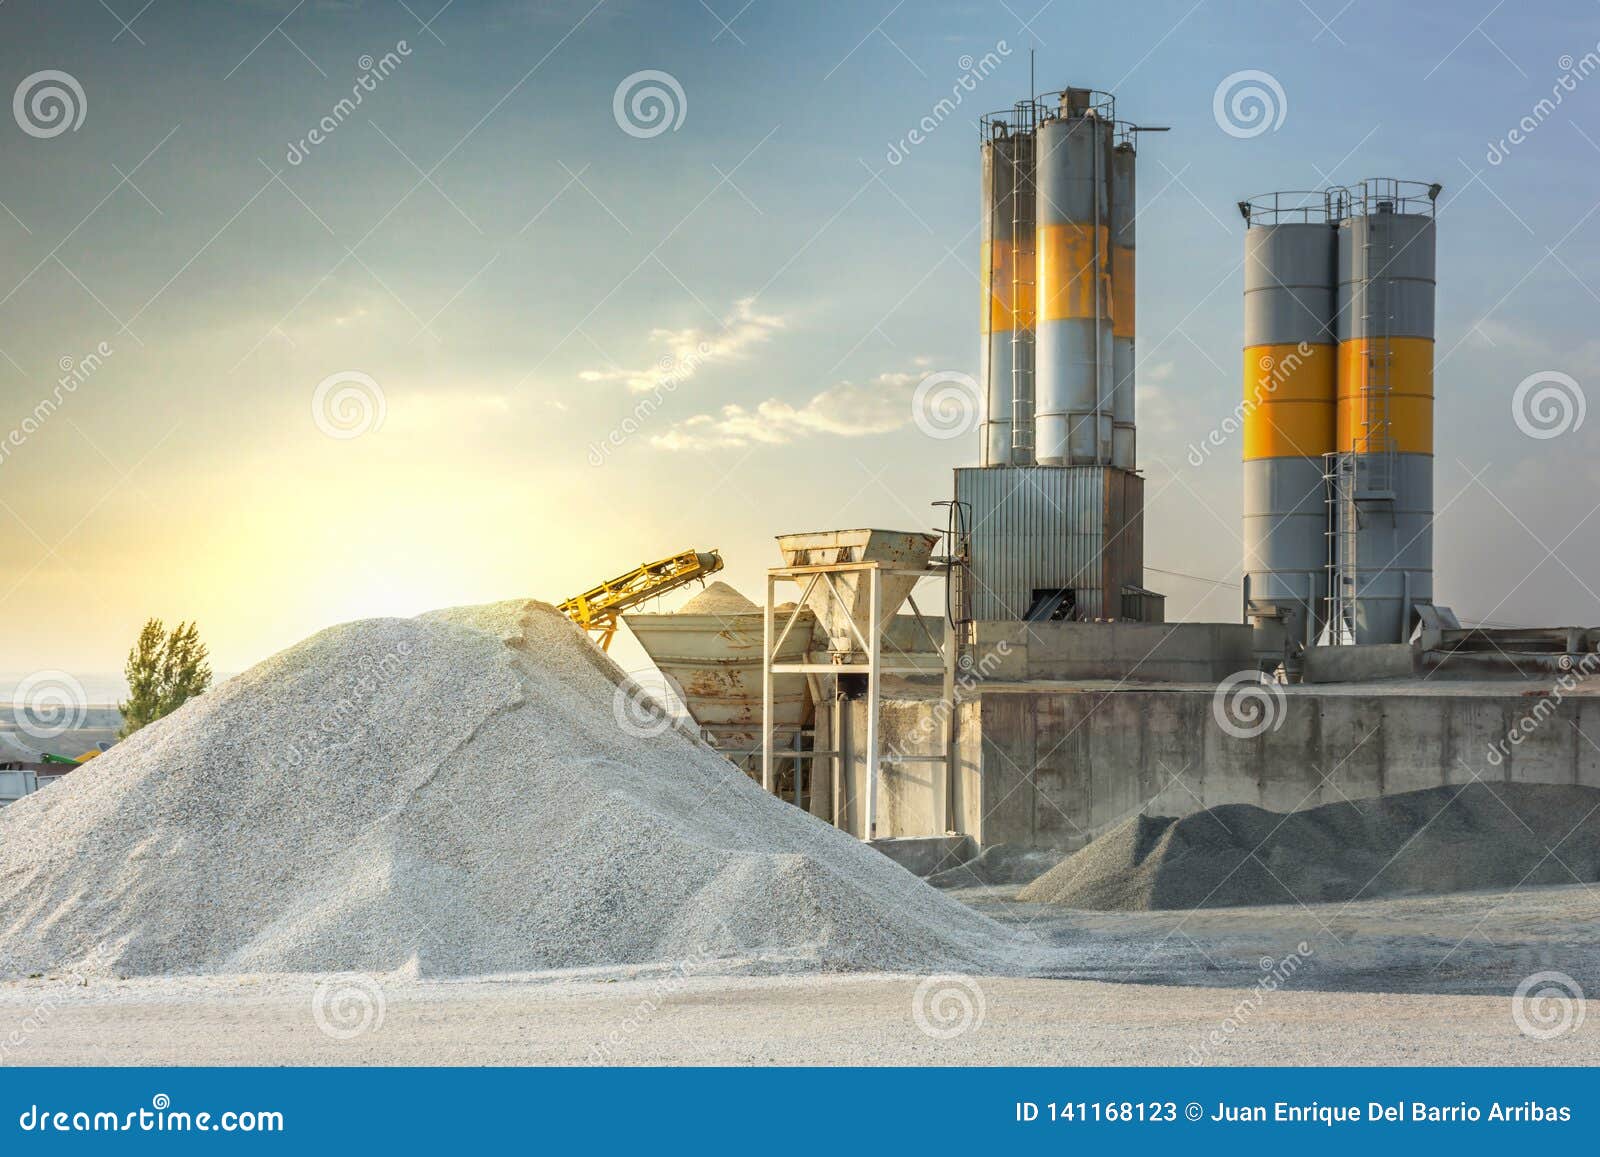 sand destined to the manufacture of cement in a quarry